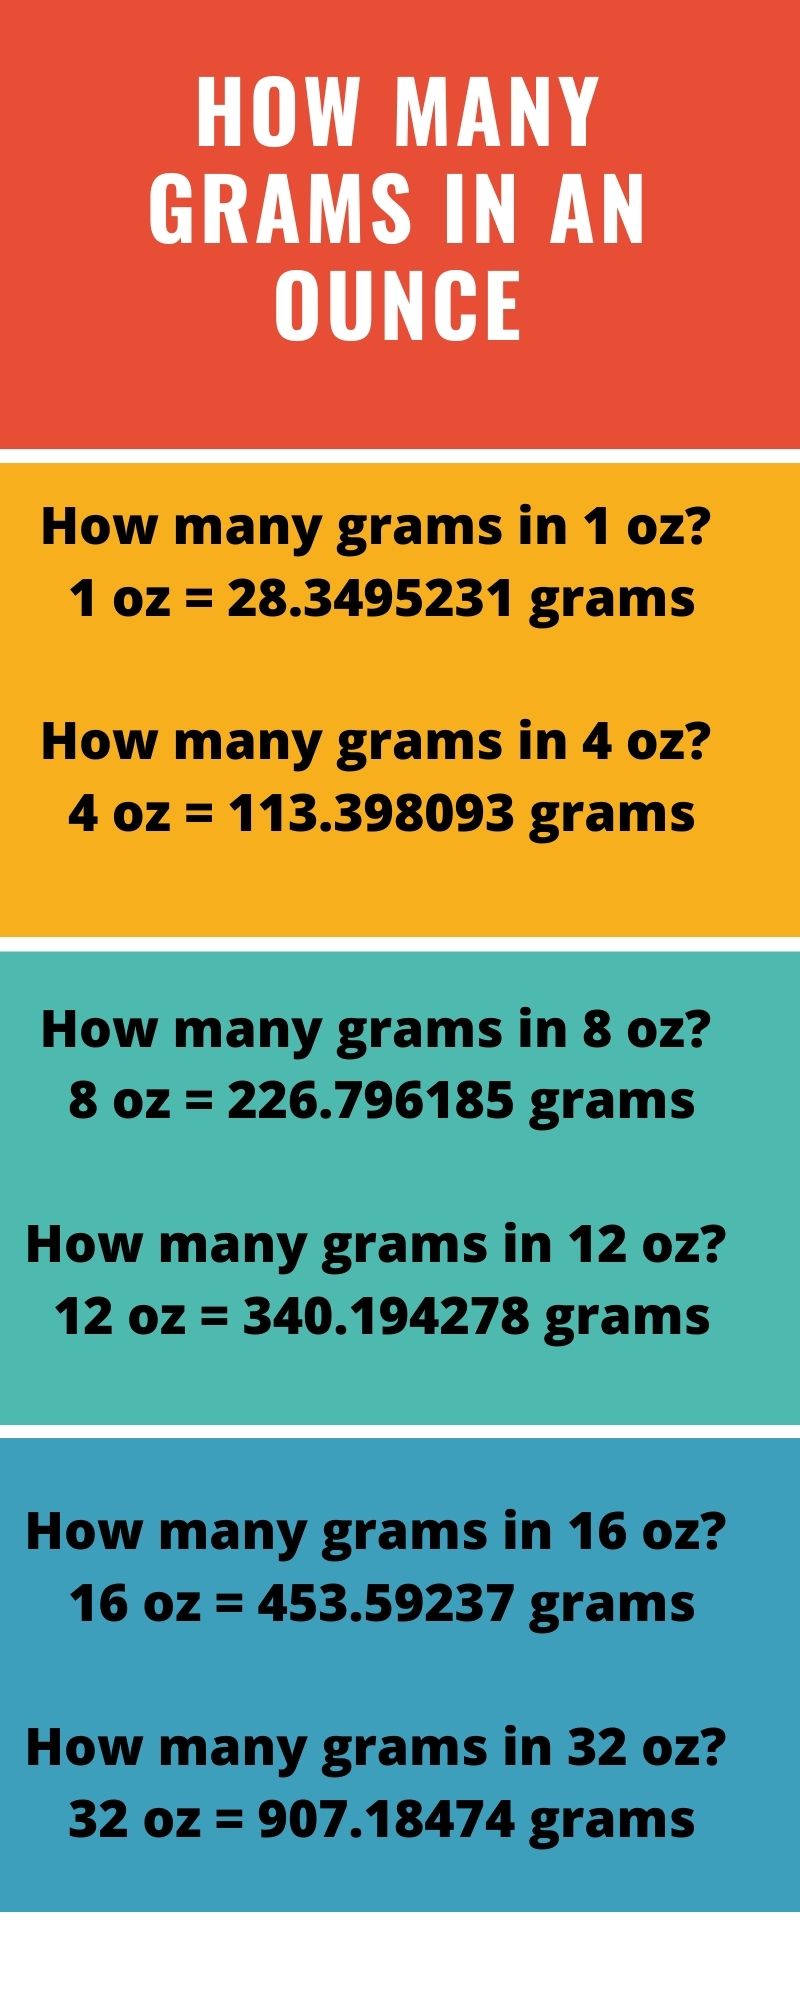 How many grams in an ounce infographic